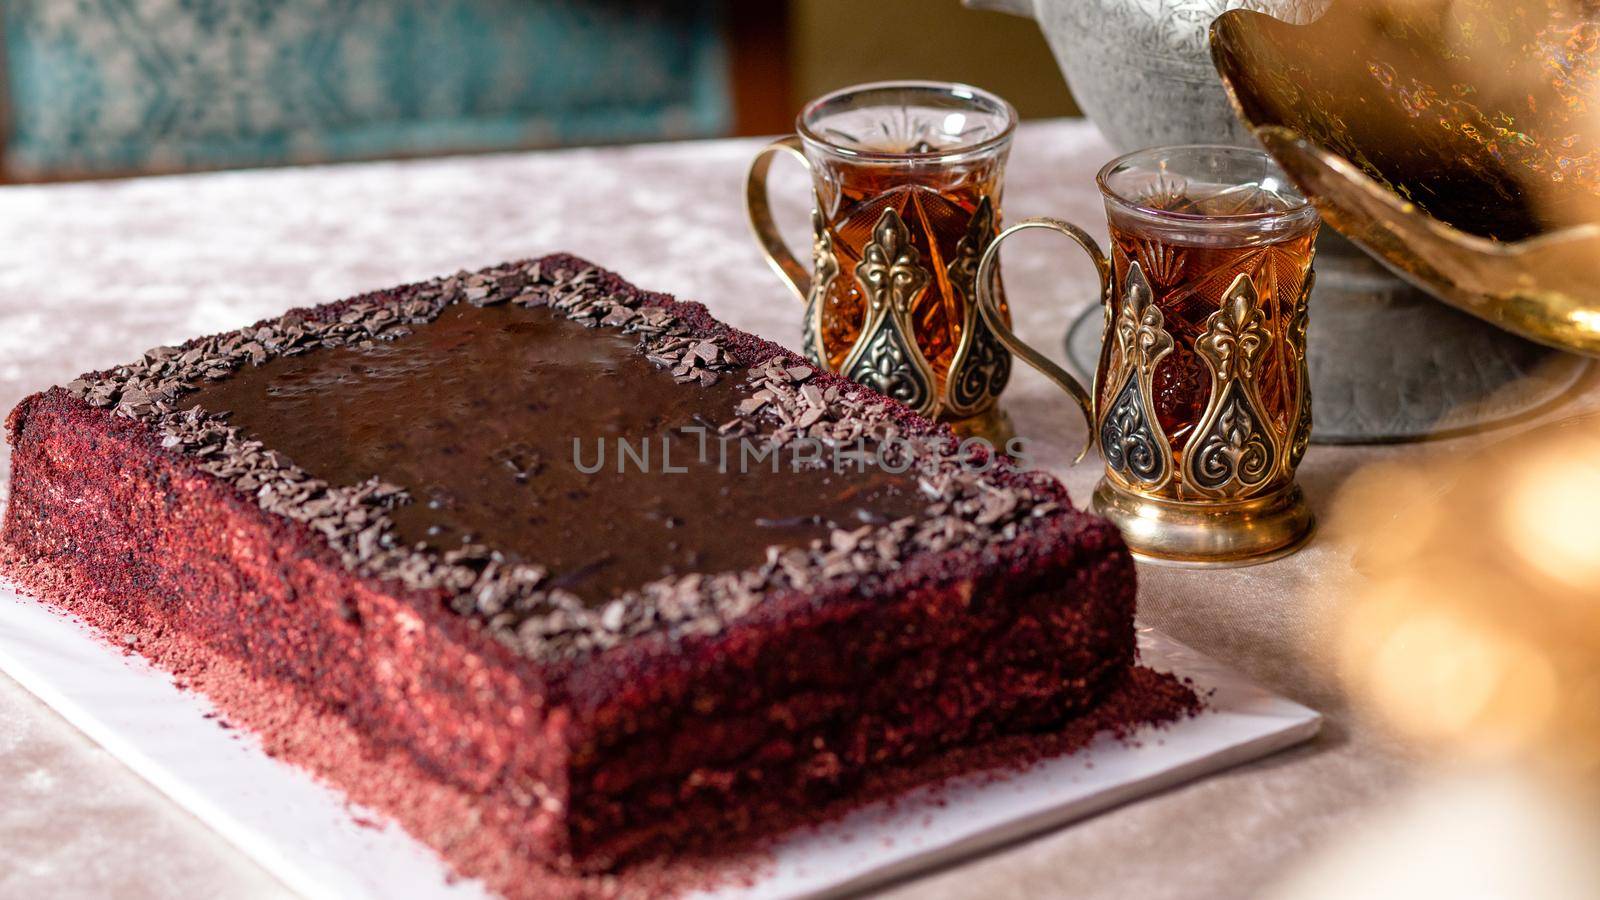 Arabic glass and red cake close up by ferhad